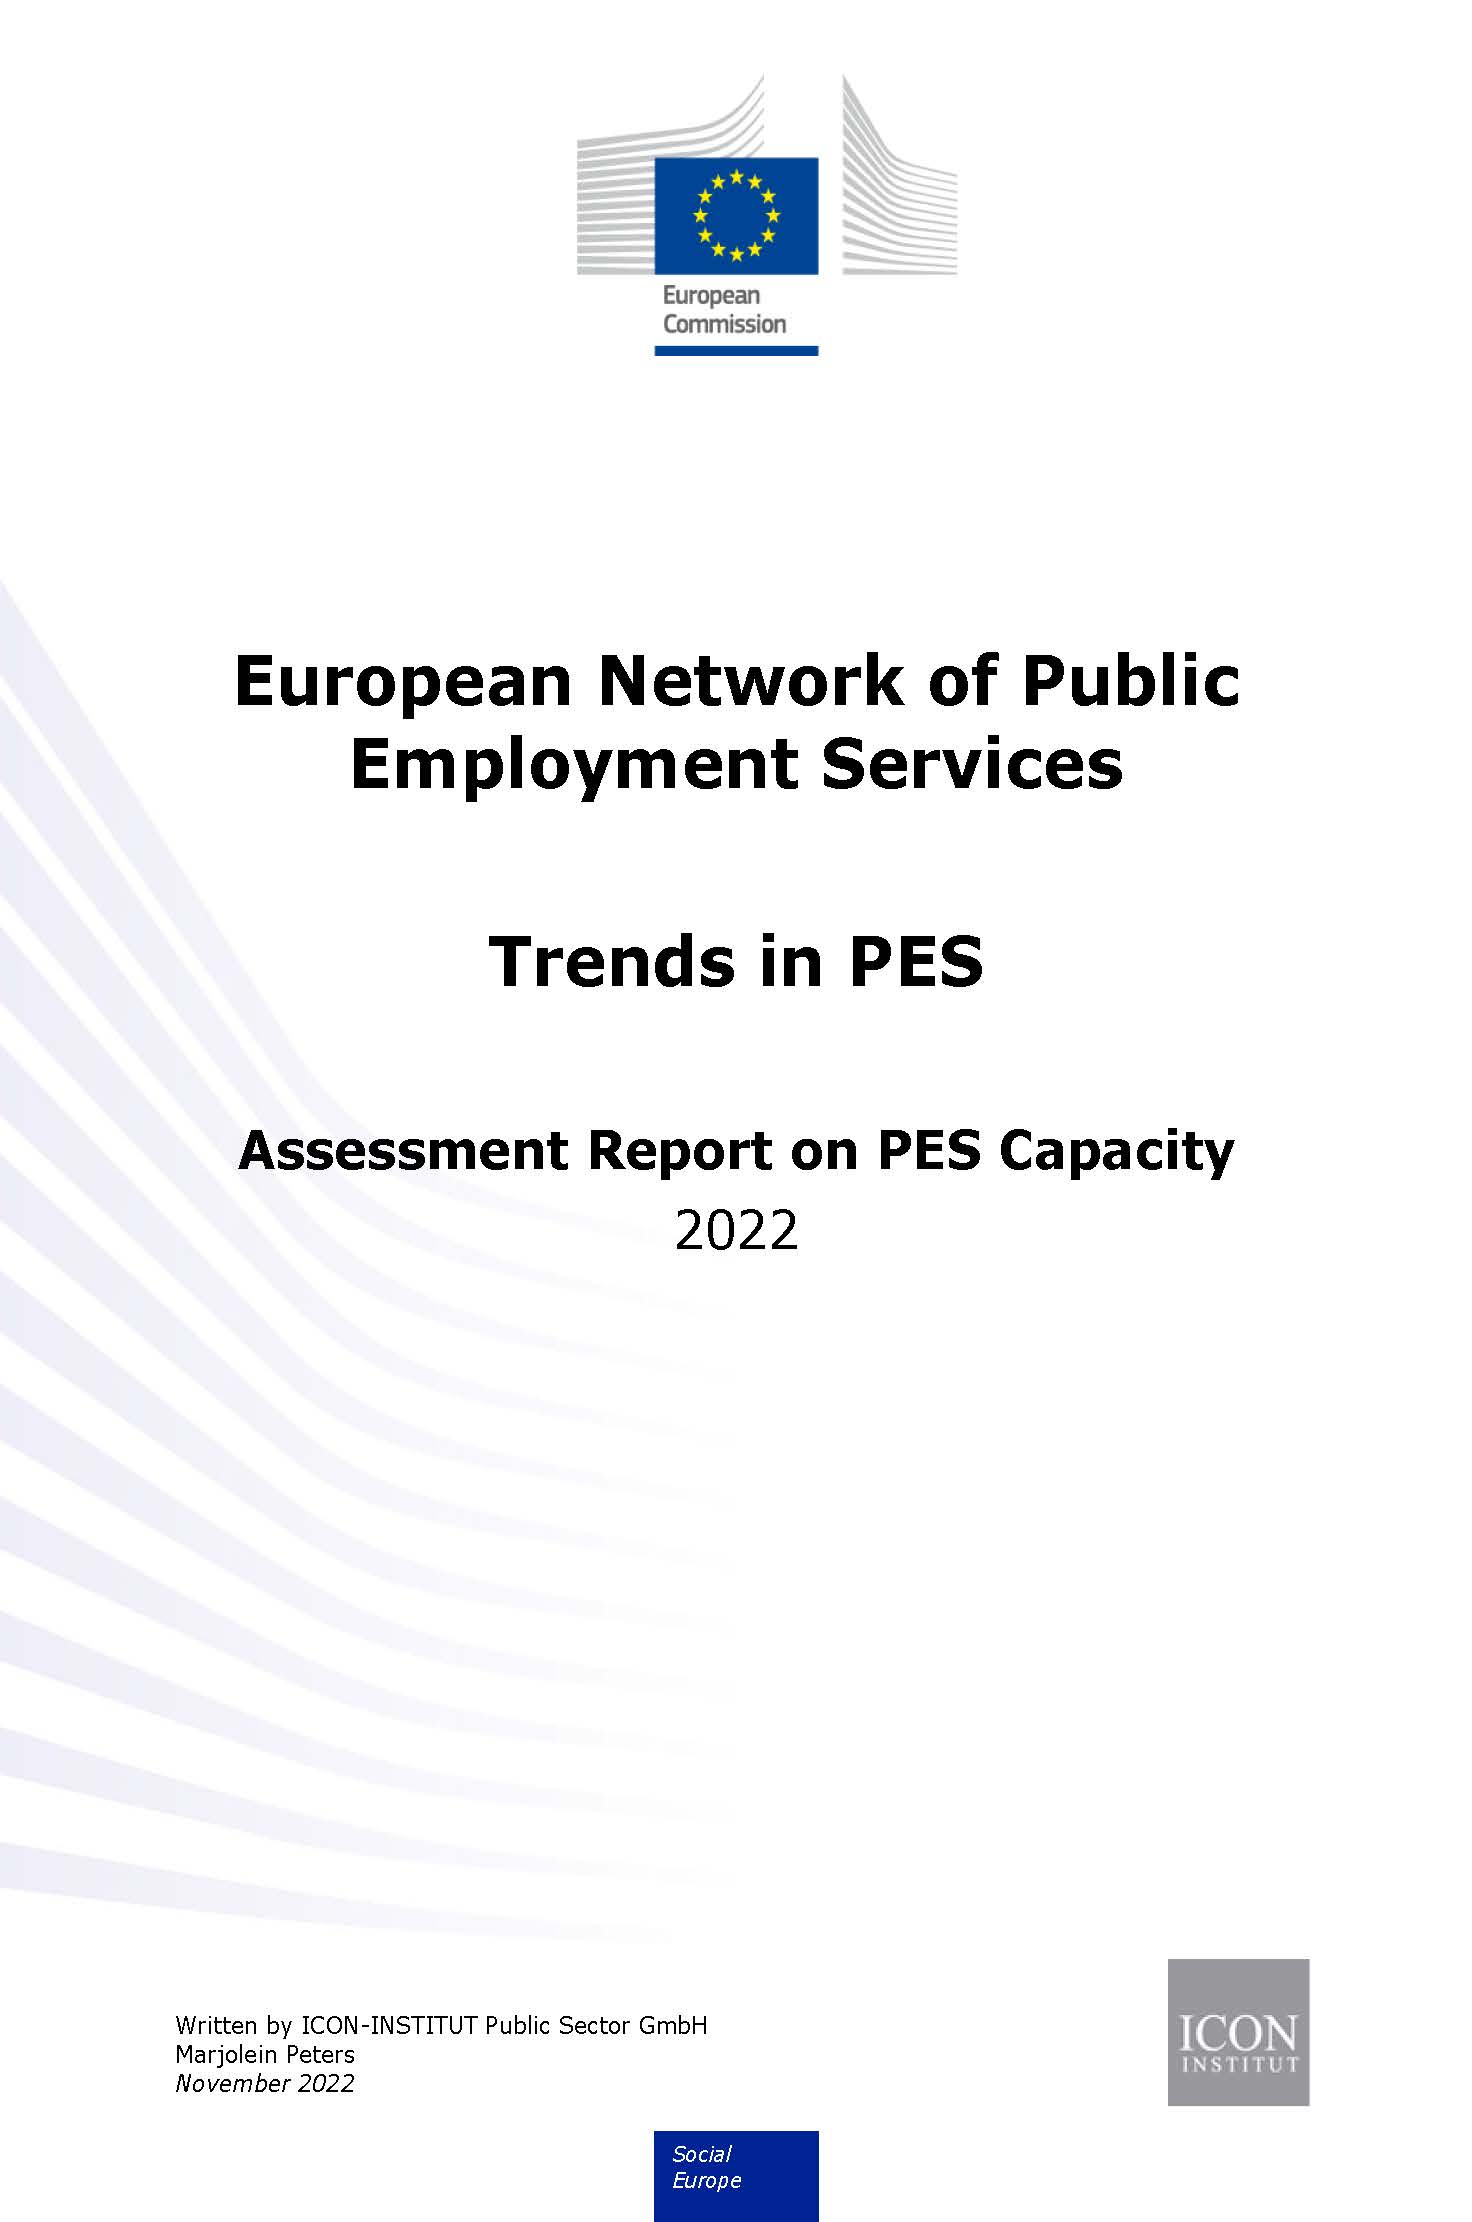 Trends in PES - Assessment Report on PES Capacity 2022 